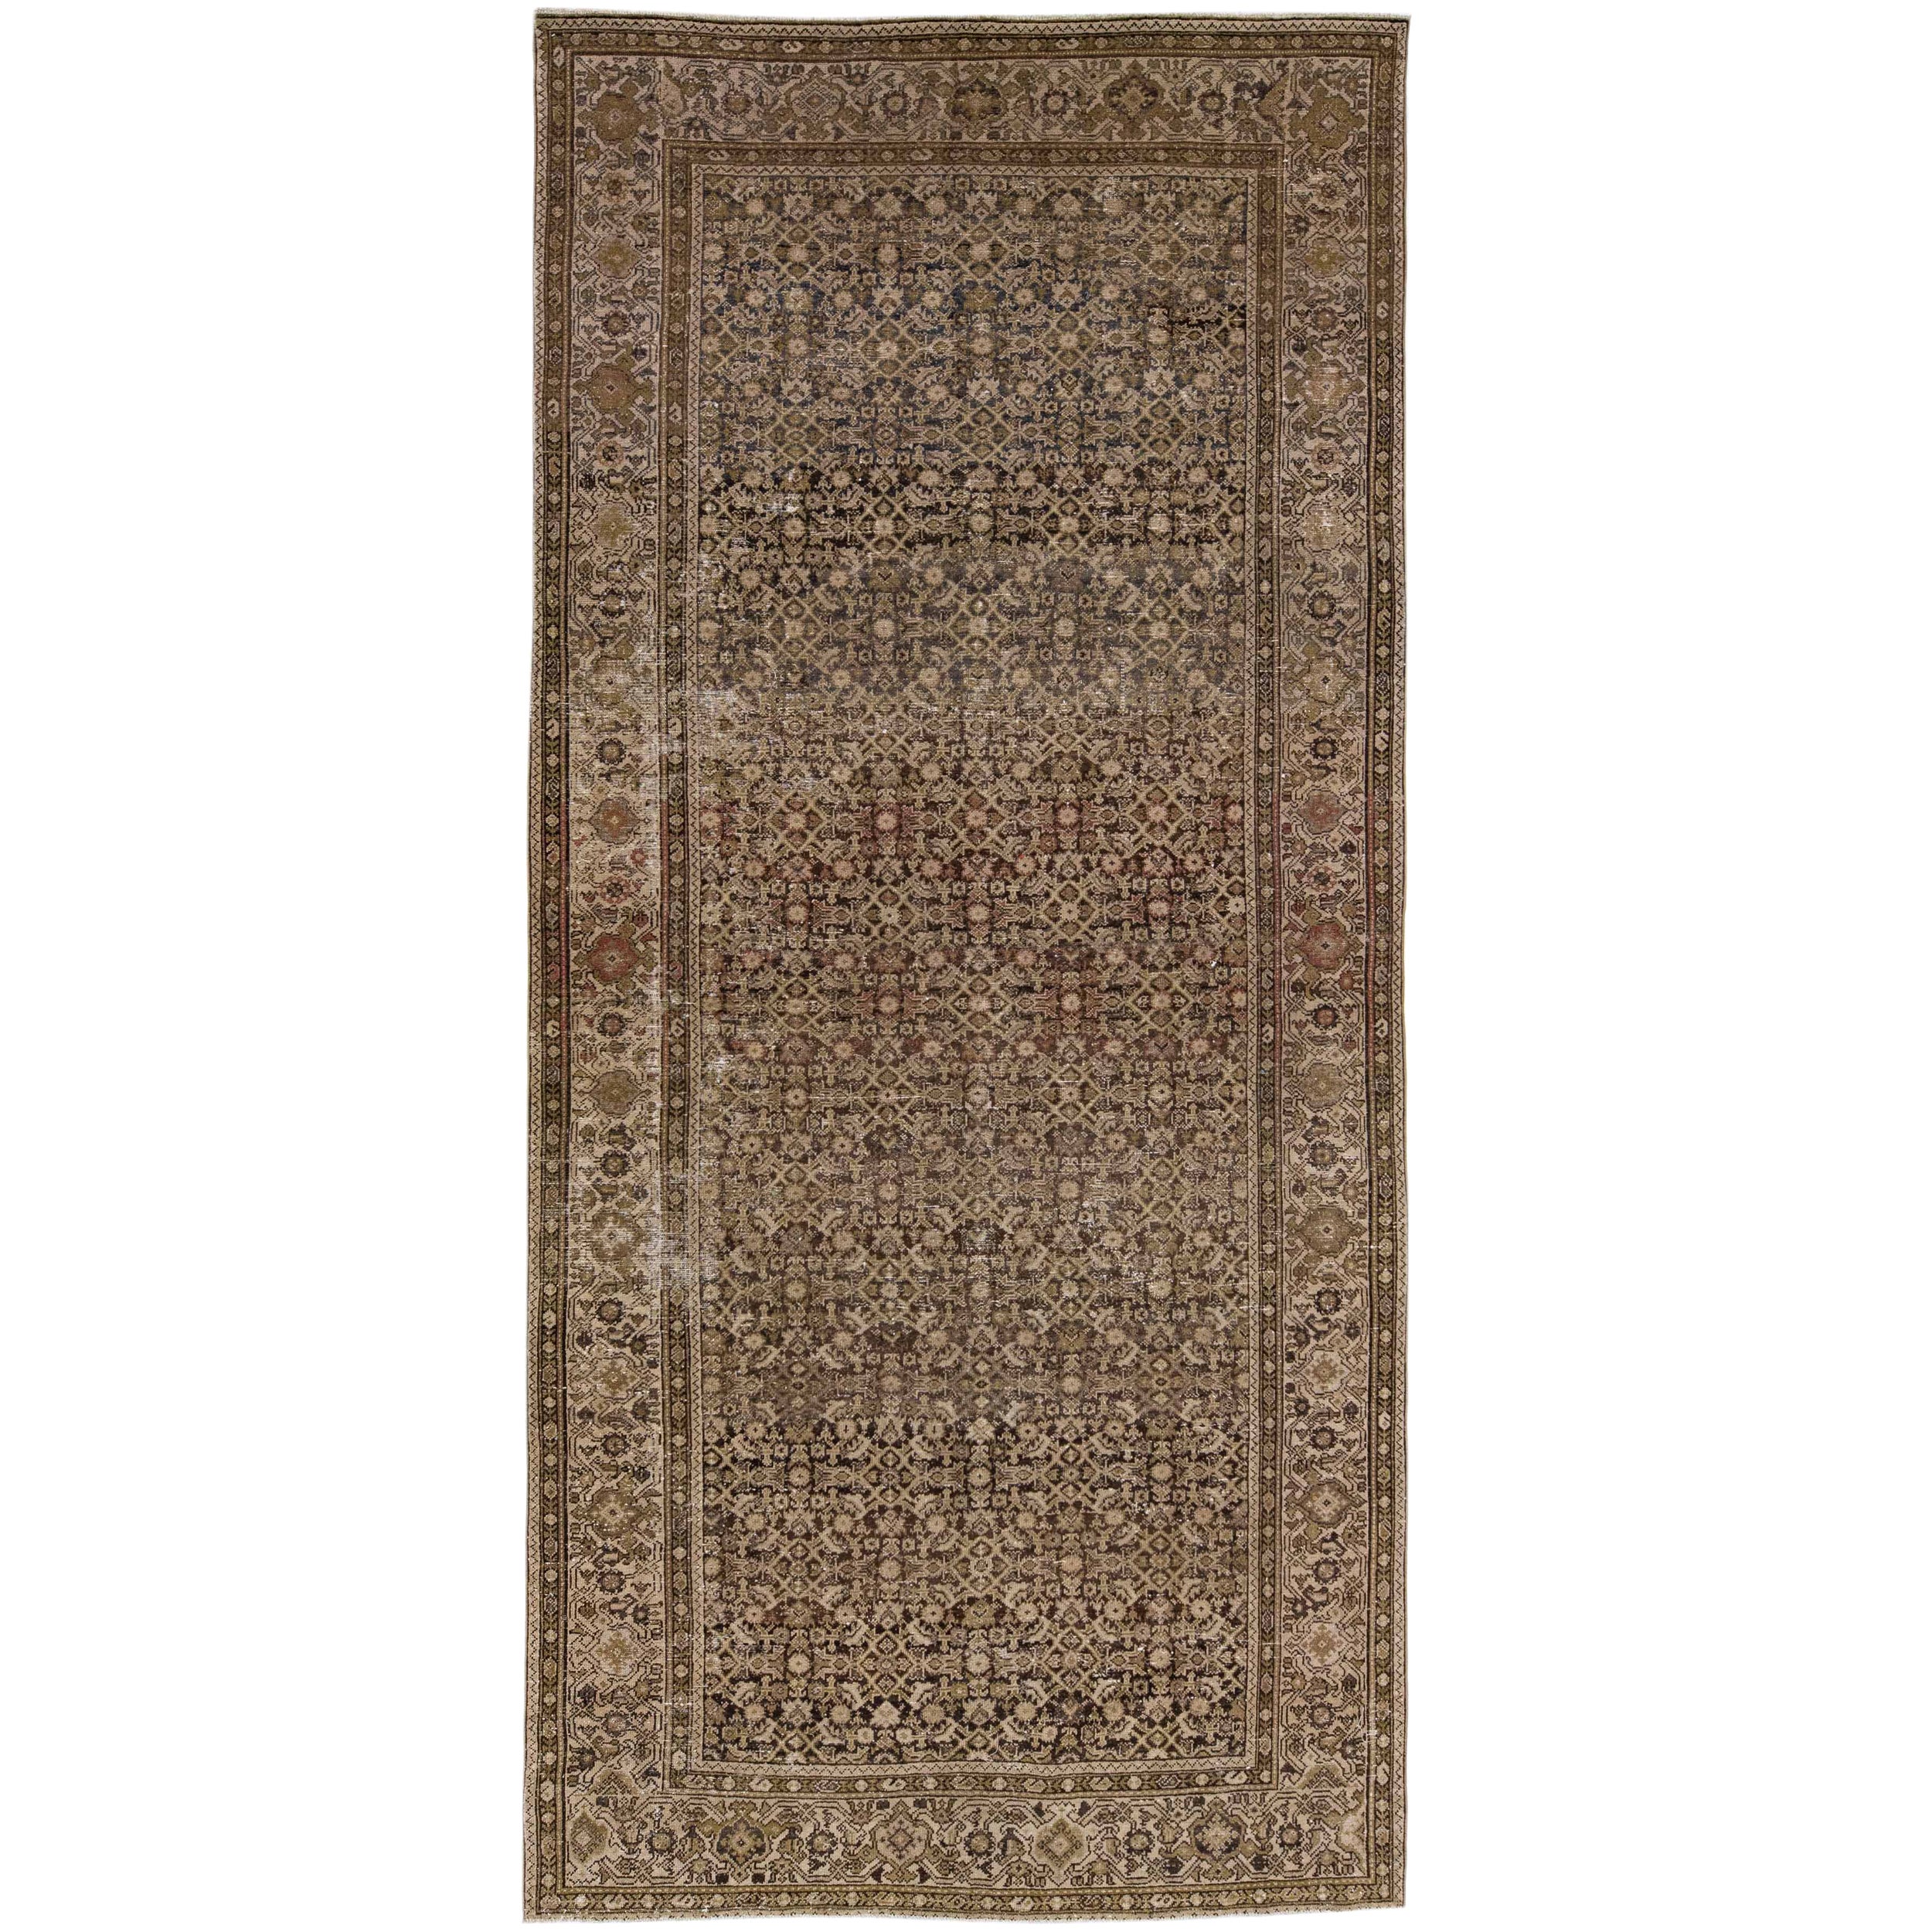 Antique Persian Malayer Brown Handmade Wool Rug with Allover Pattern